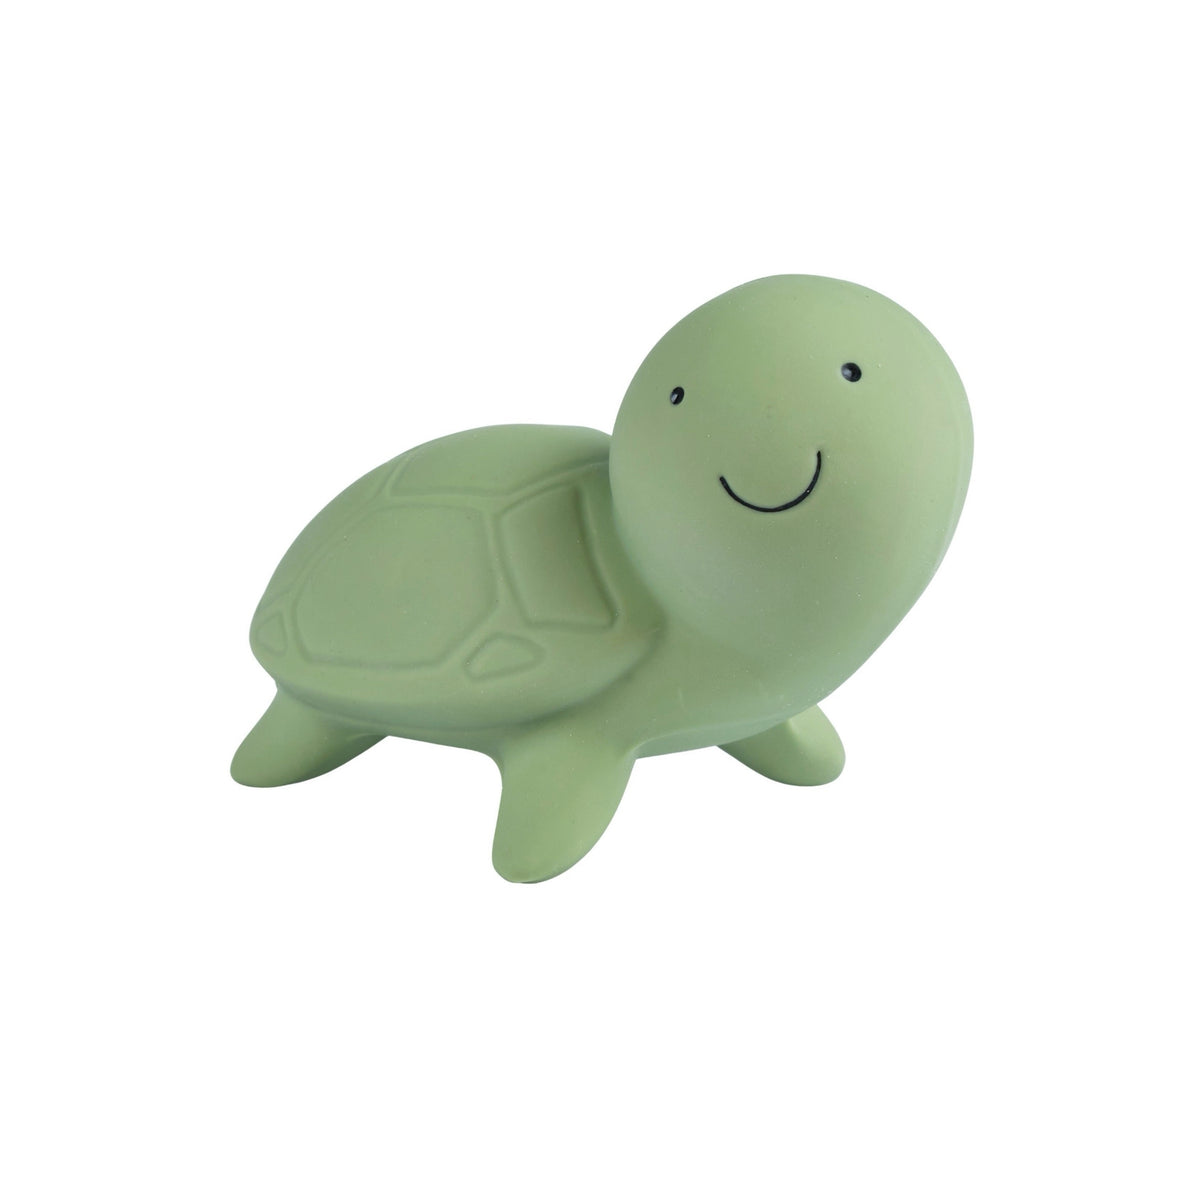 Turtle Organic Natural Rubber Teether, Rattle & Bath Toy